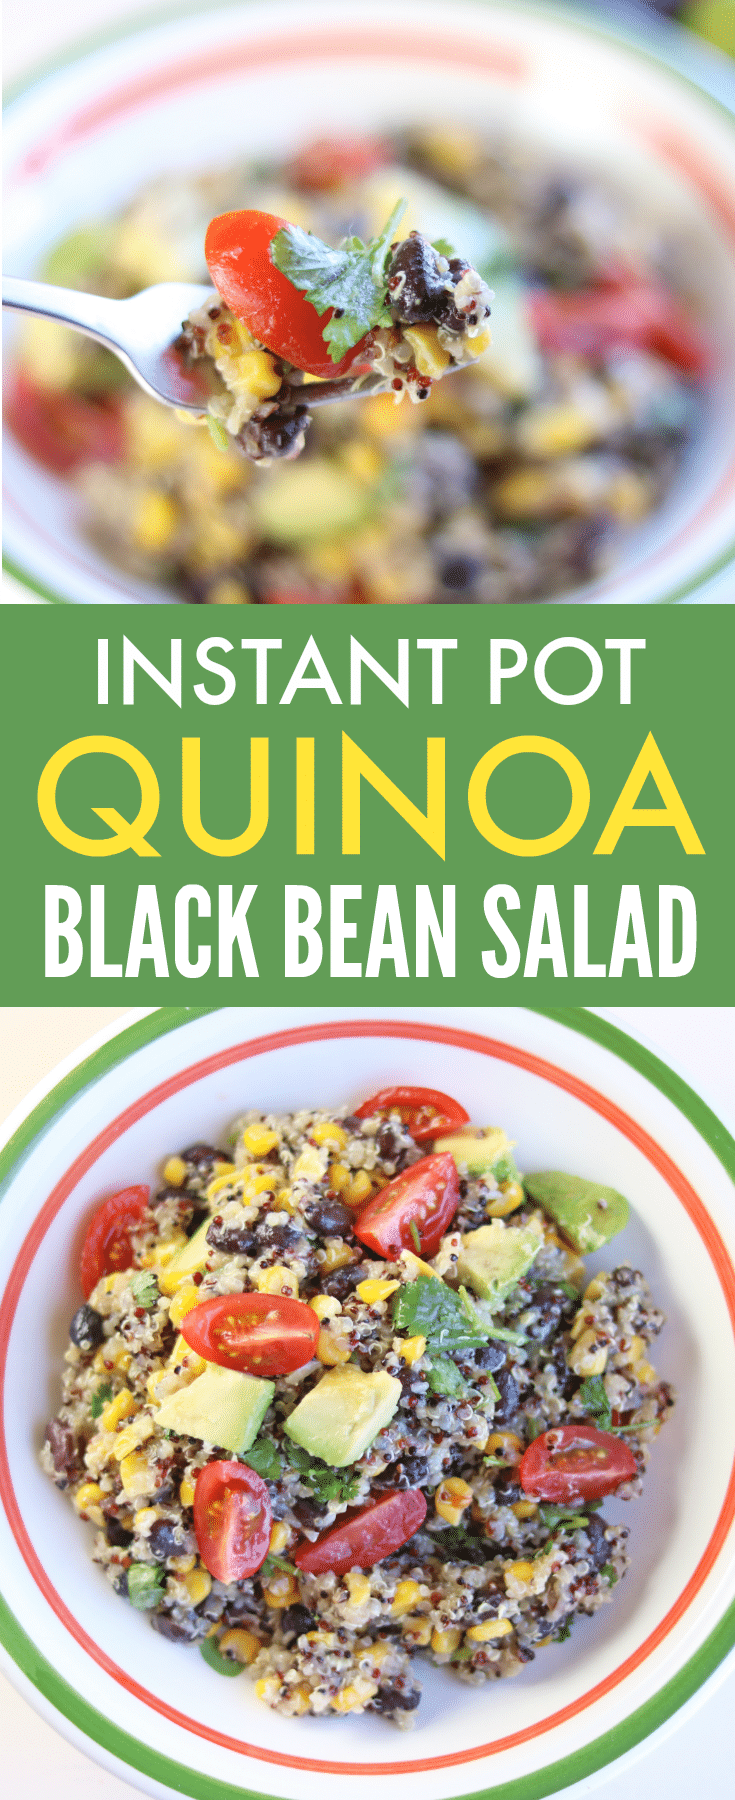 This Instant Pot Quinoa Black Bean Salad is colorful, flavorful, and really good for you! That's why it's a family favorite. #sidedish #texmex #quinoa #healthyeating via @wondermomwannab